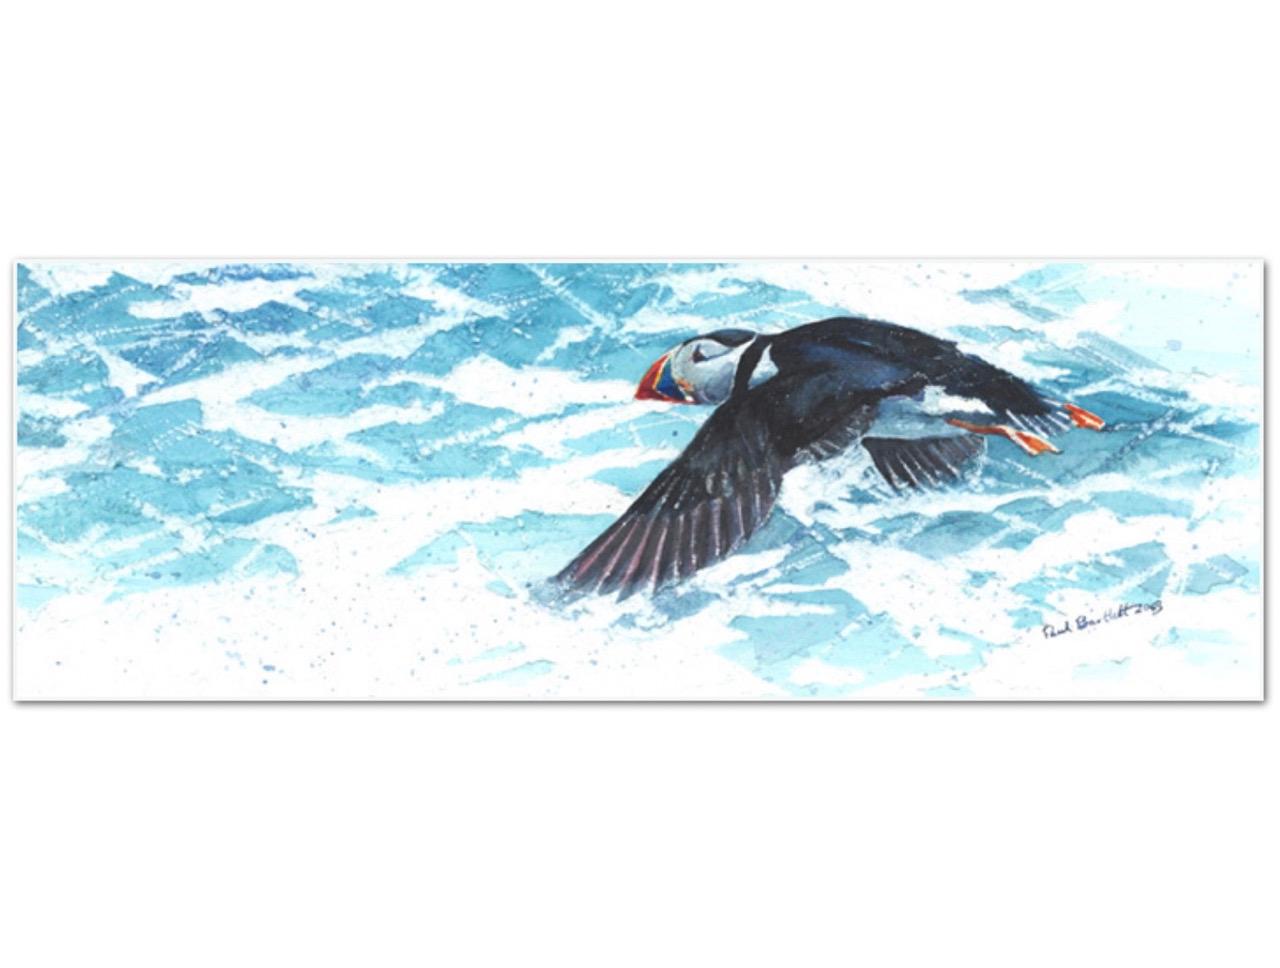 Paul Bartlett is a highly acclaimed artist who has won many awards for his original depictions of nature which inform and educate the viewer on conservation issues. 

Solitary Puffin is a small print featuring a Puffin peacefully flying over the